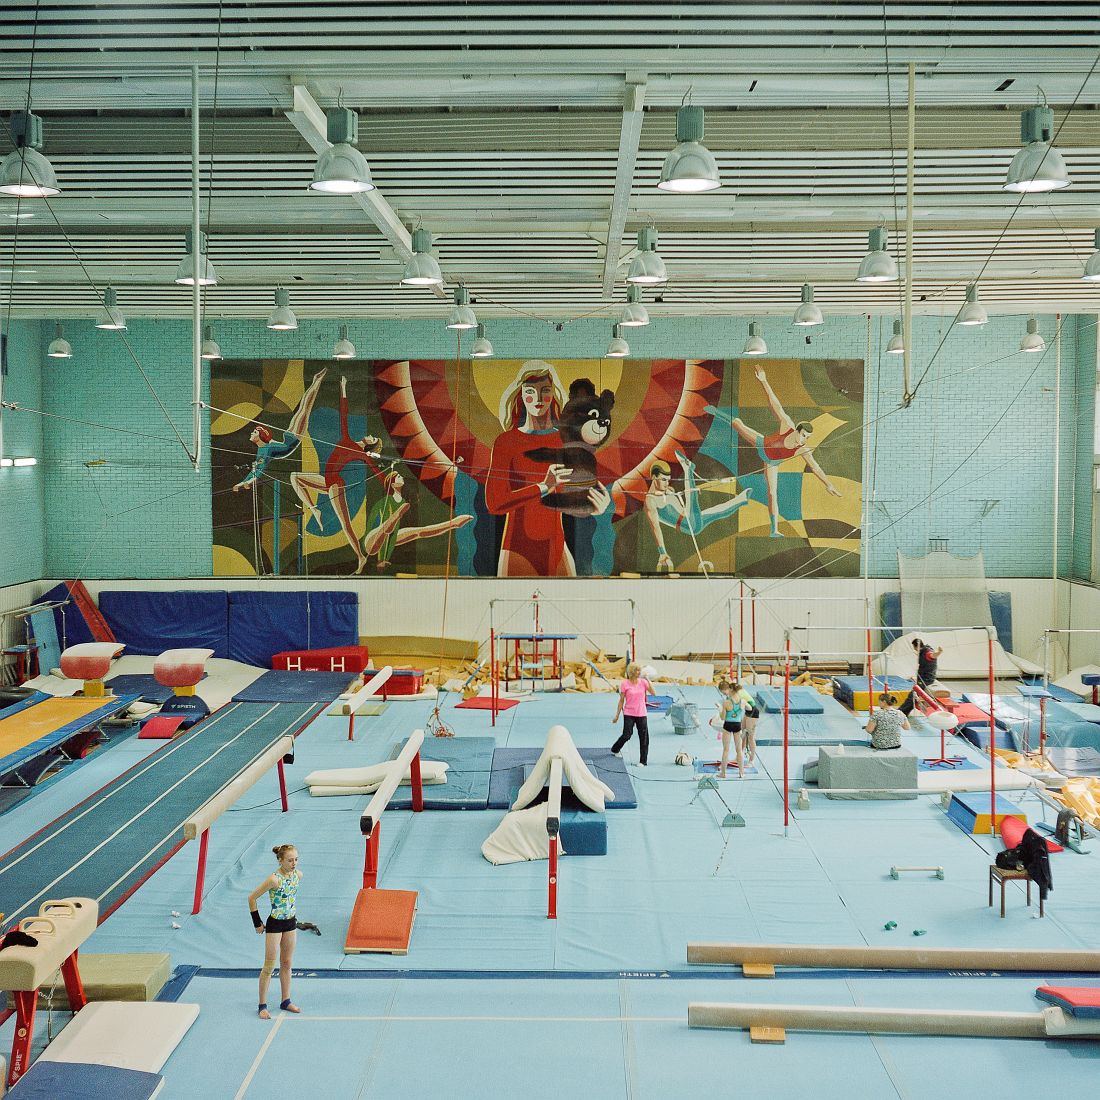 Interior of a Gymnastics hall at Moscow Olympiysky Sports Complex. The sports complex completed in 1980 remains the largest stadium in Europe. During Moscow Olympics it hosted competitions in 22 different disciplines. Currently apart from being used for sports and musical venues, it hosts offices, bars, clothes market.